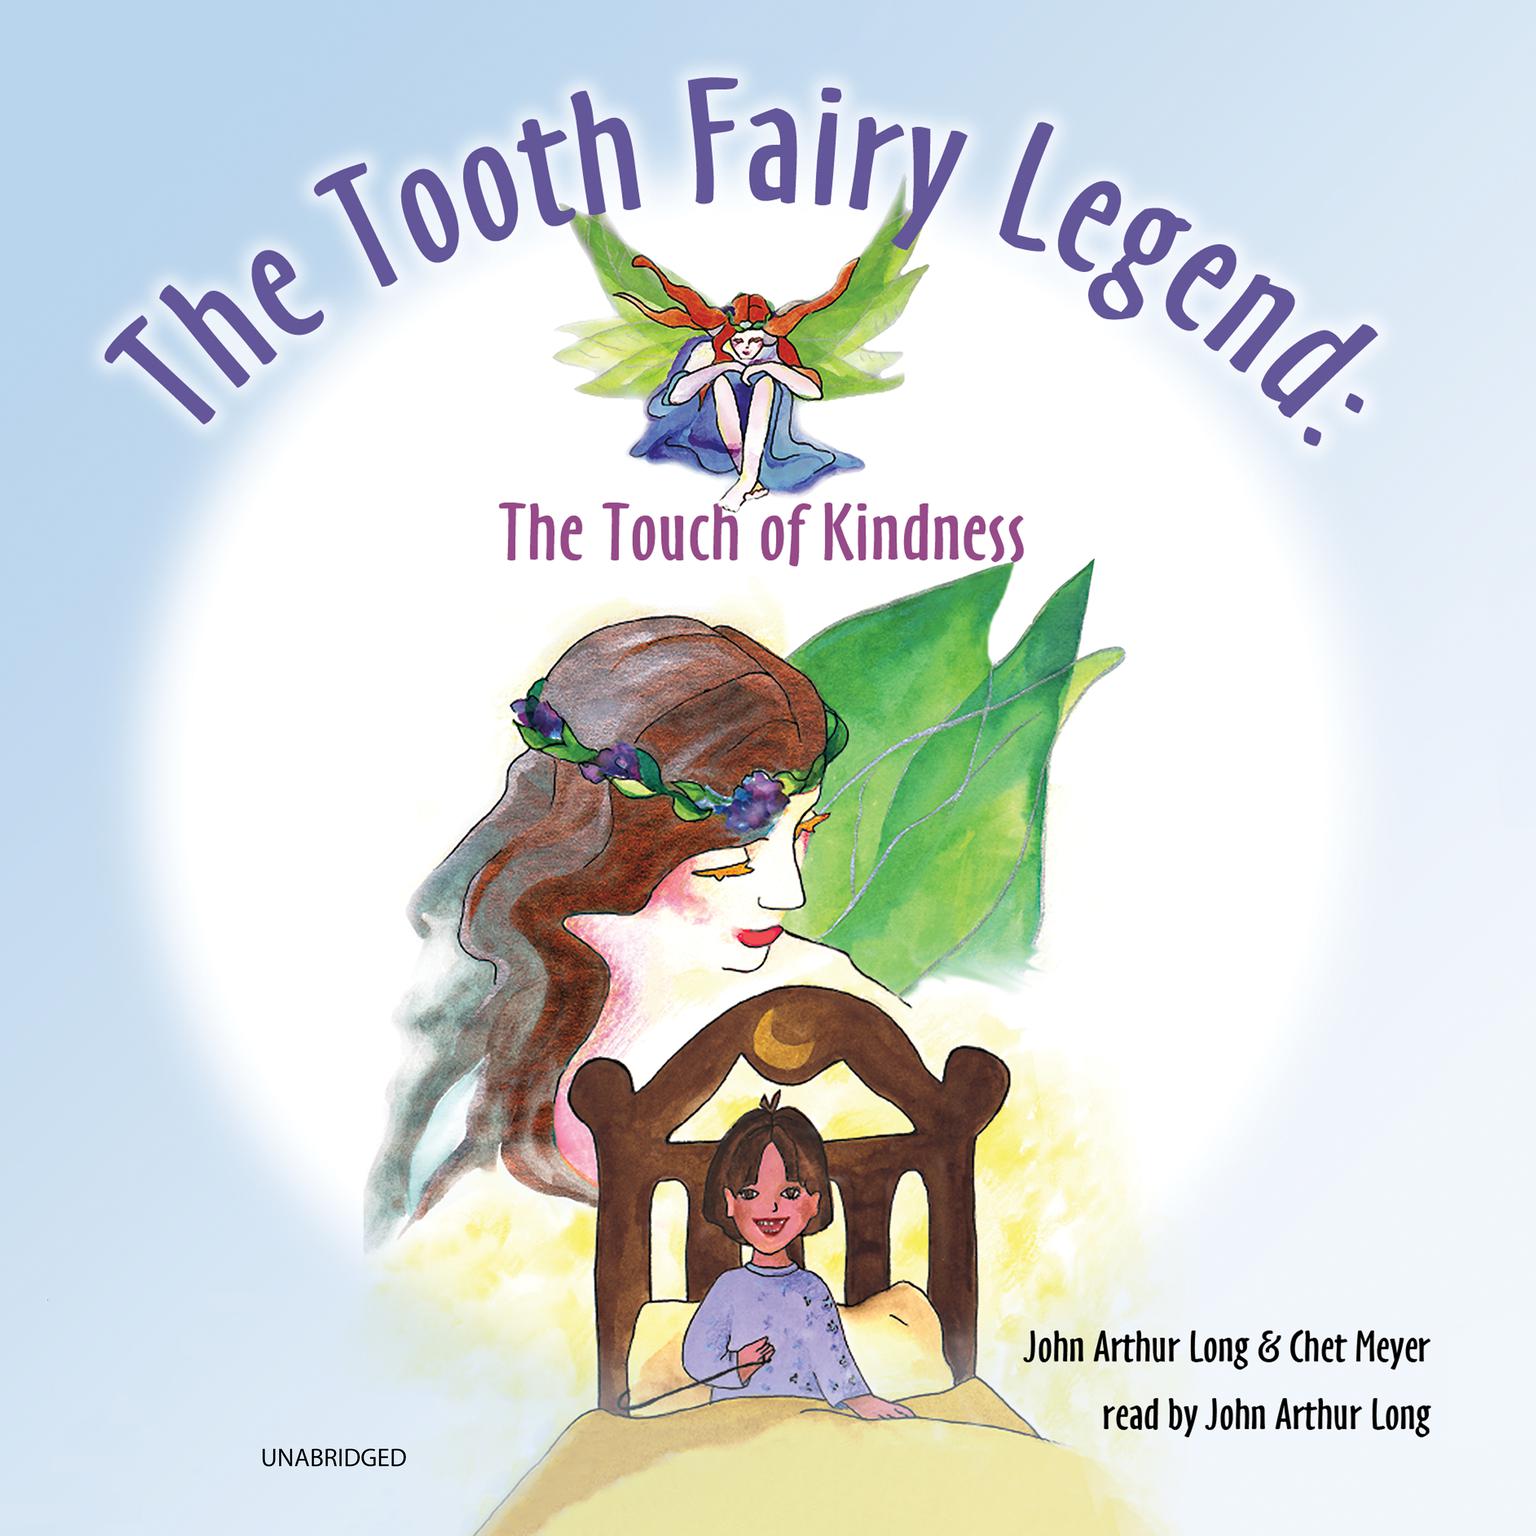 The Tooth Fairy Legend: The Touch of Kindness Audiobook, by John Arthur Long